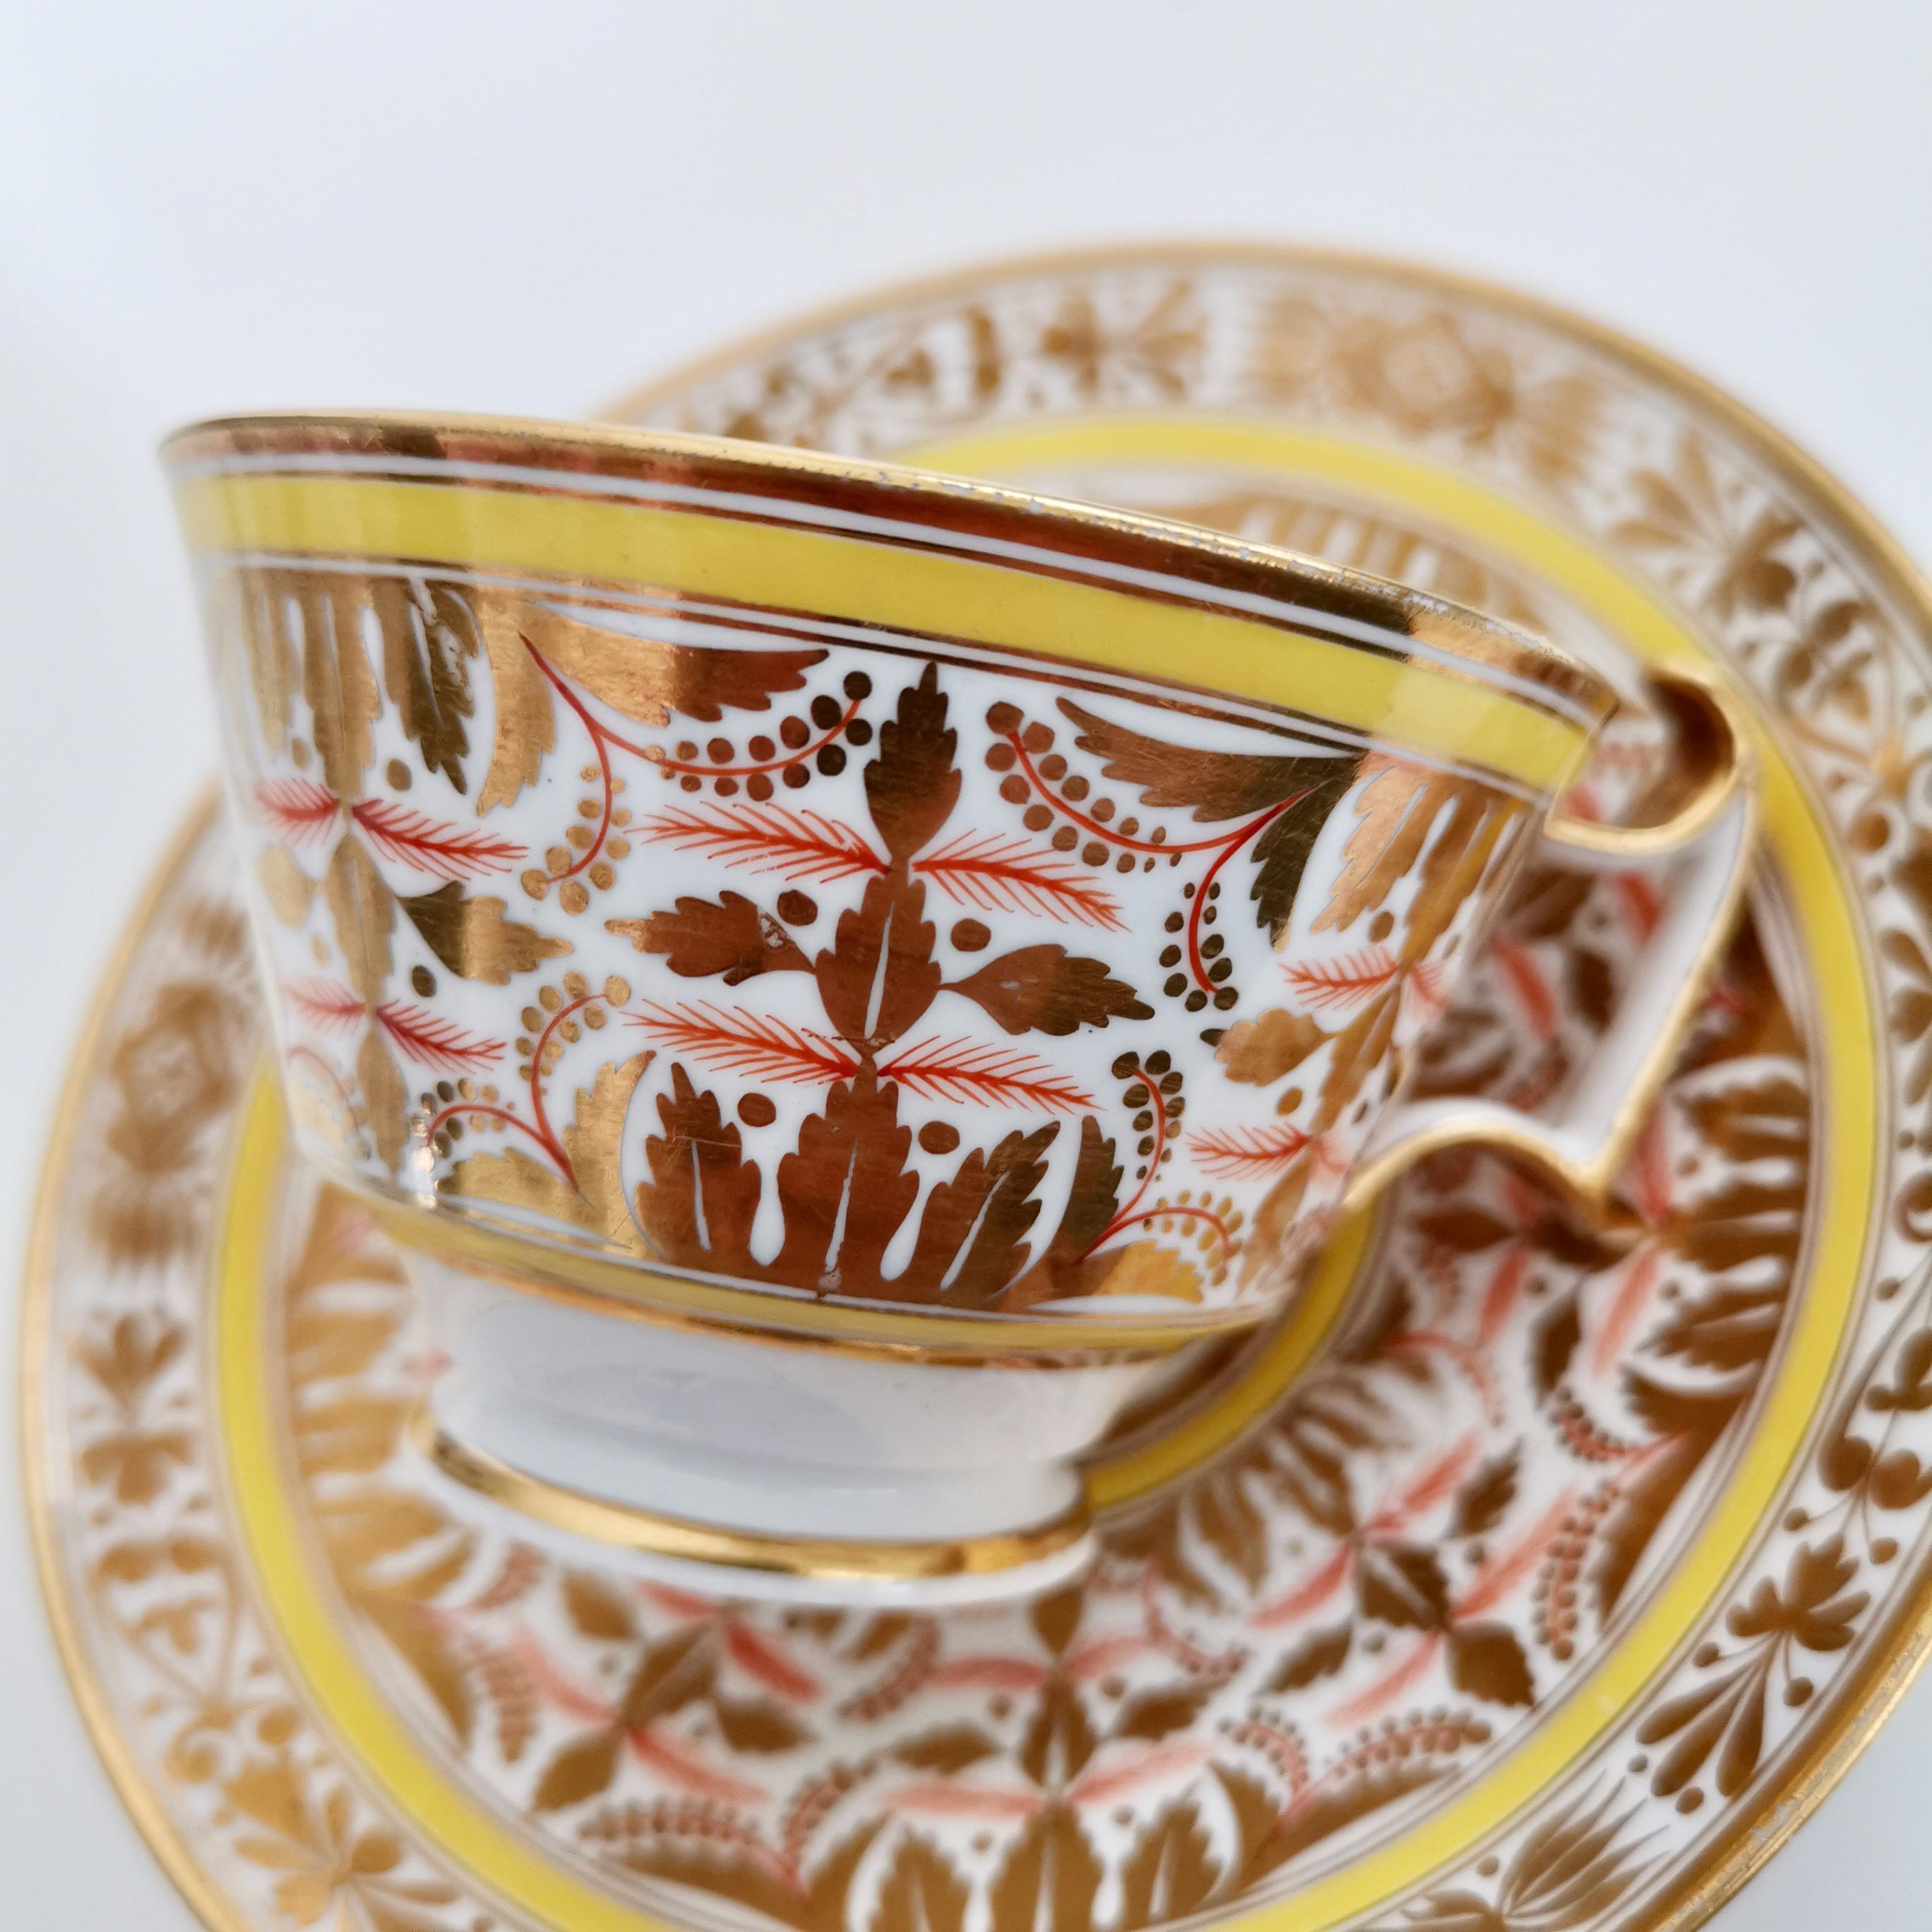 Spode Porcelain Teacup Set, Gilt, Yellow and Red Regency Pattern, circa 1815 6